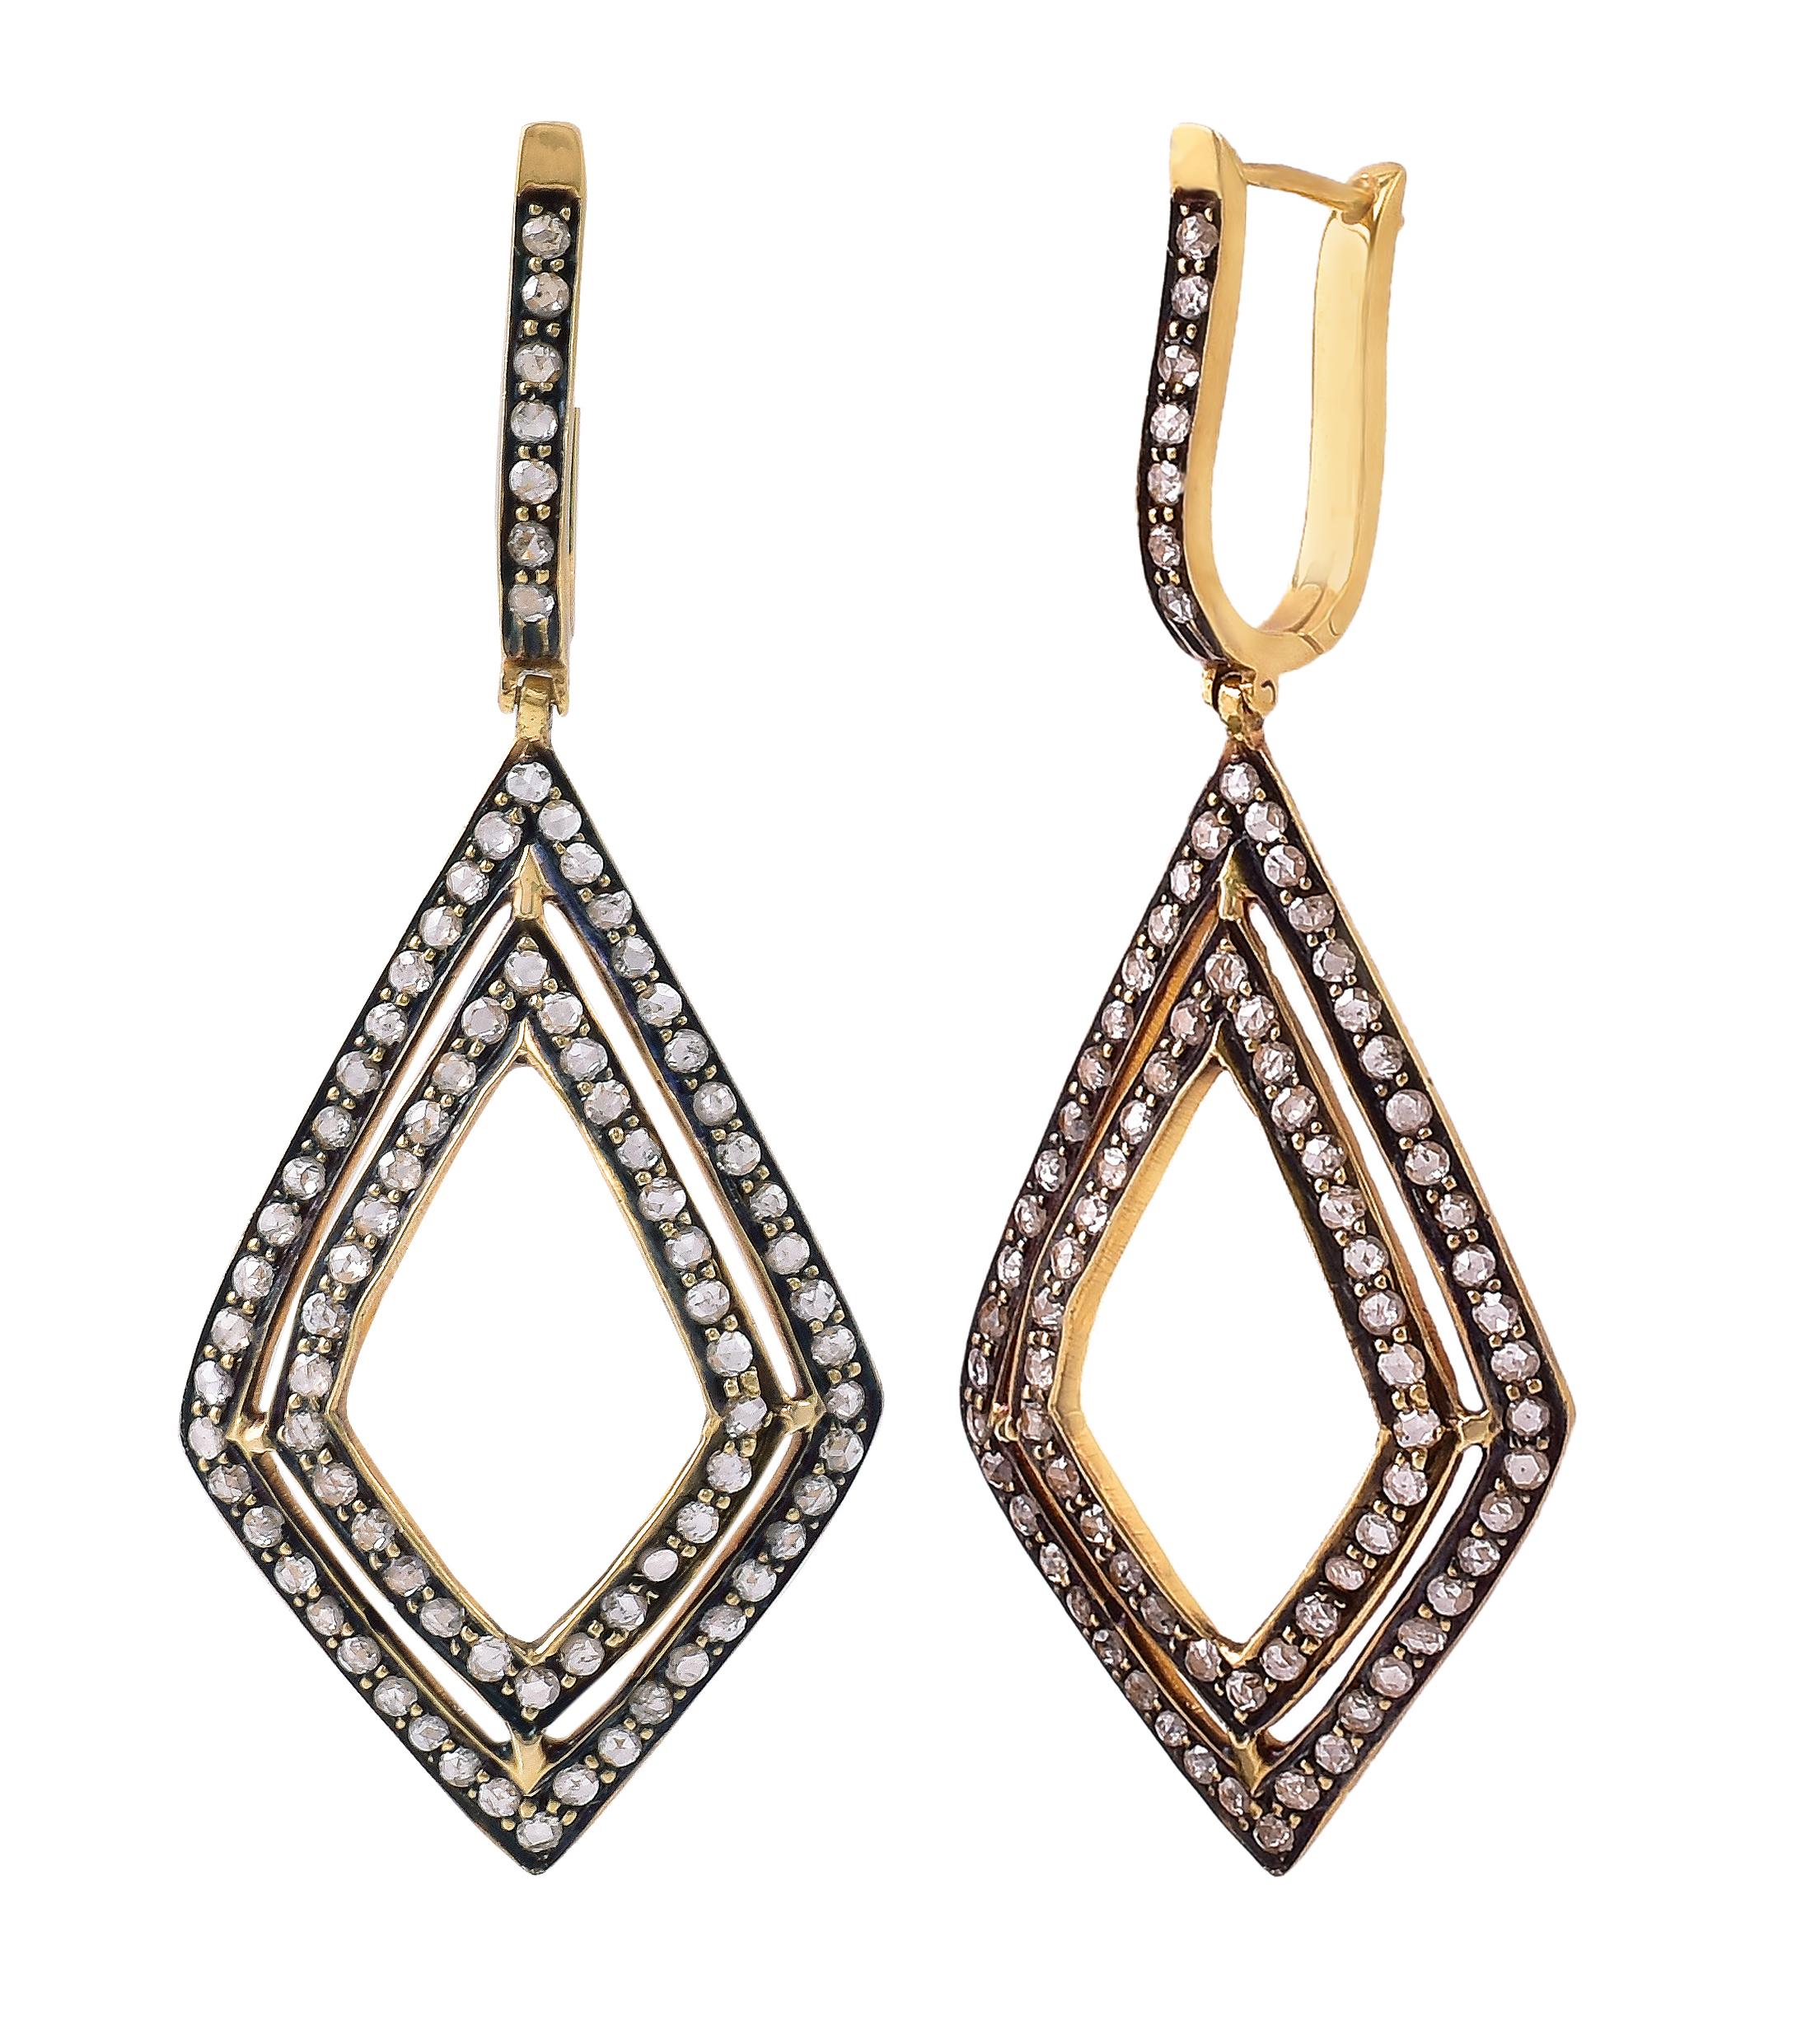 Diamond Dangle Earrings in Contemporary Victorian Style

This Victorian art-deco style diamond pave set kite shape long earring is marvelous. The bottom kite shape is elegantly formed with two rows of pave bezel set diamonds adjoined together with